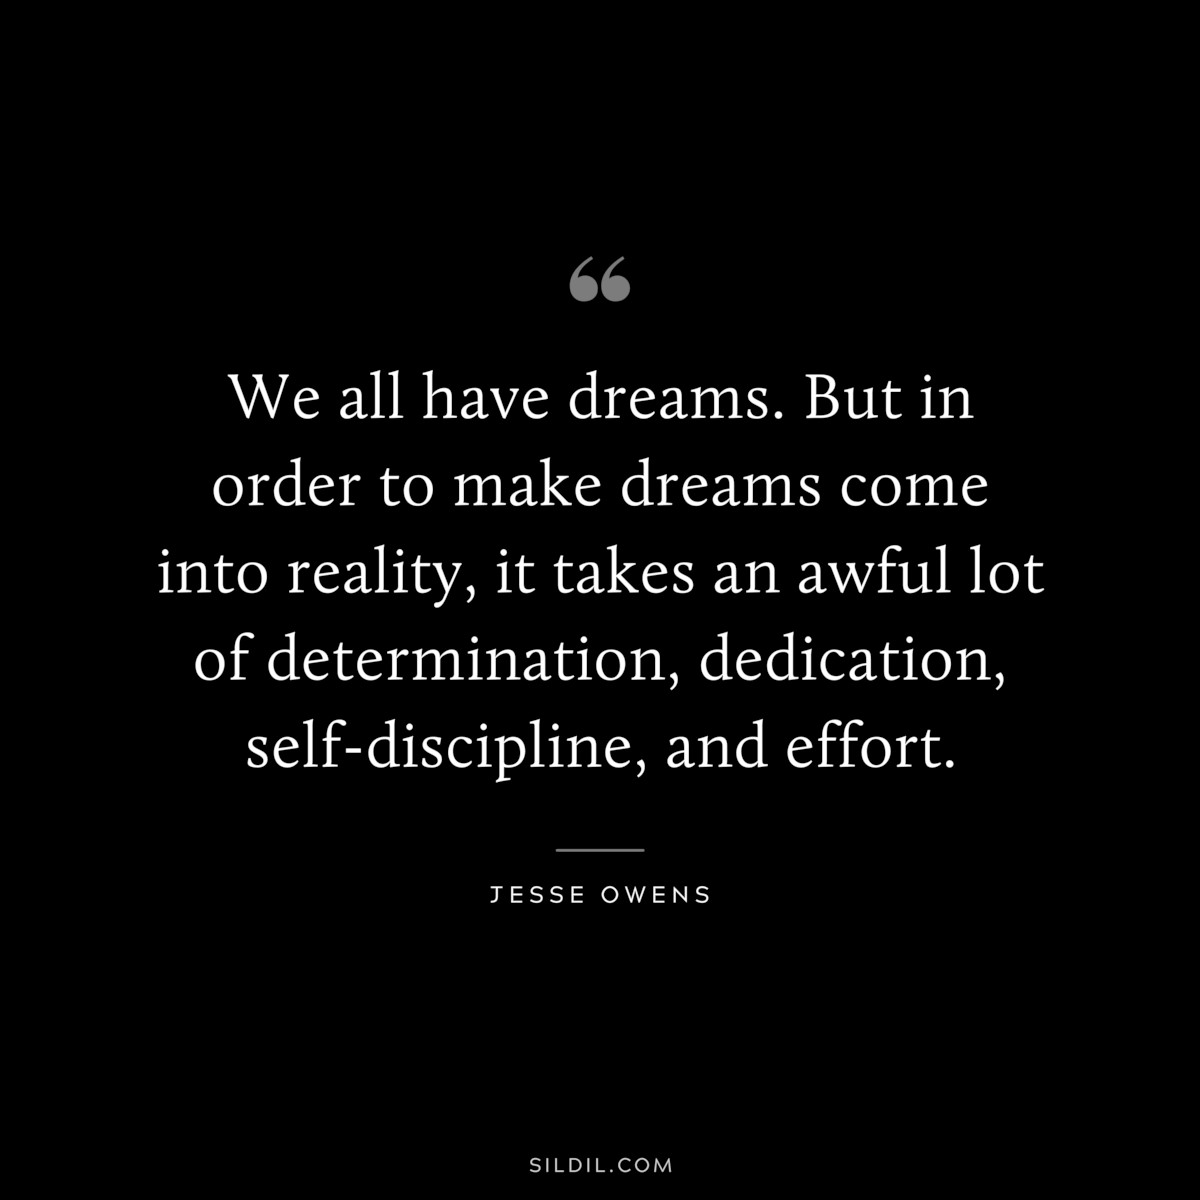 We all have dreams. But in order to make dreams come into reality, it takes an awful lot of determination, dedication, self-discipline, and effort. ― Jesse Owens